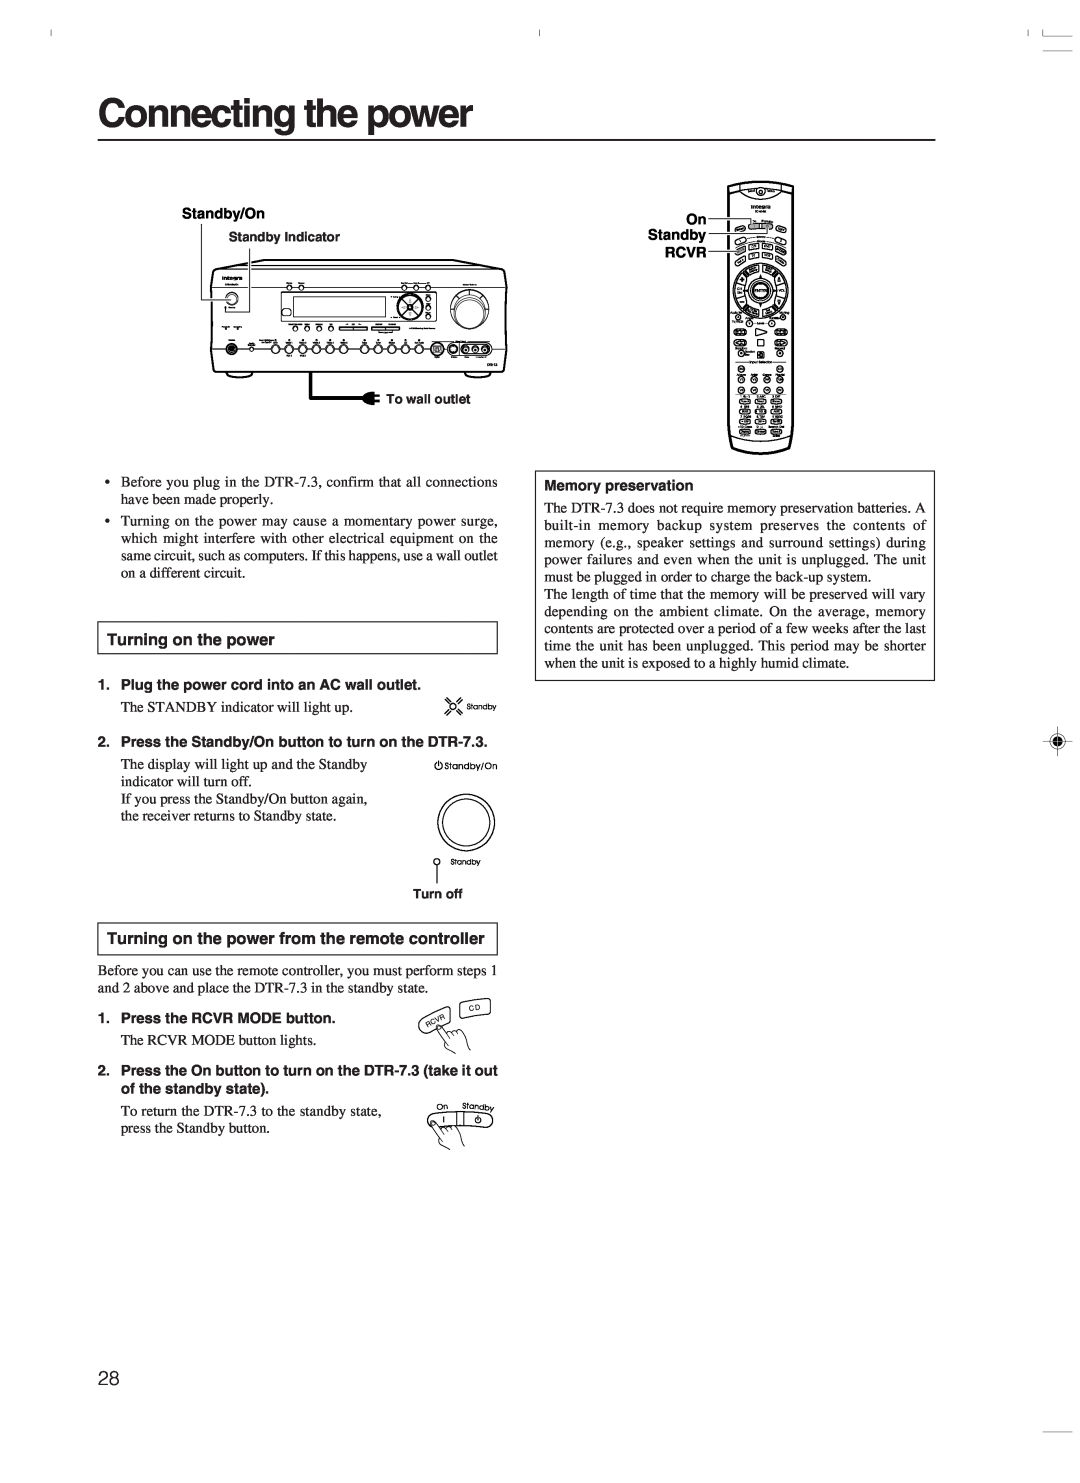 Integra DTR-7.3 instruction manual Connecting the power, Turning on the power from the remote controller 